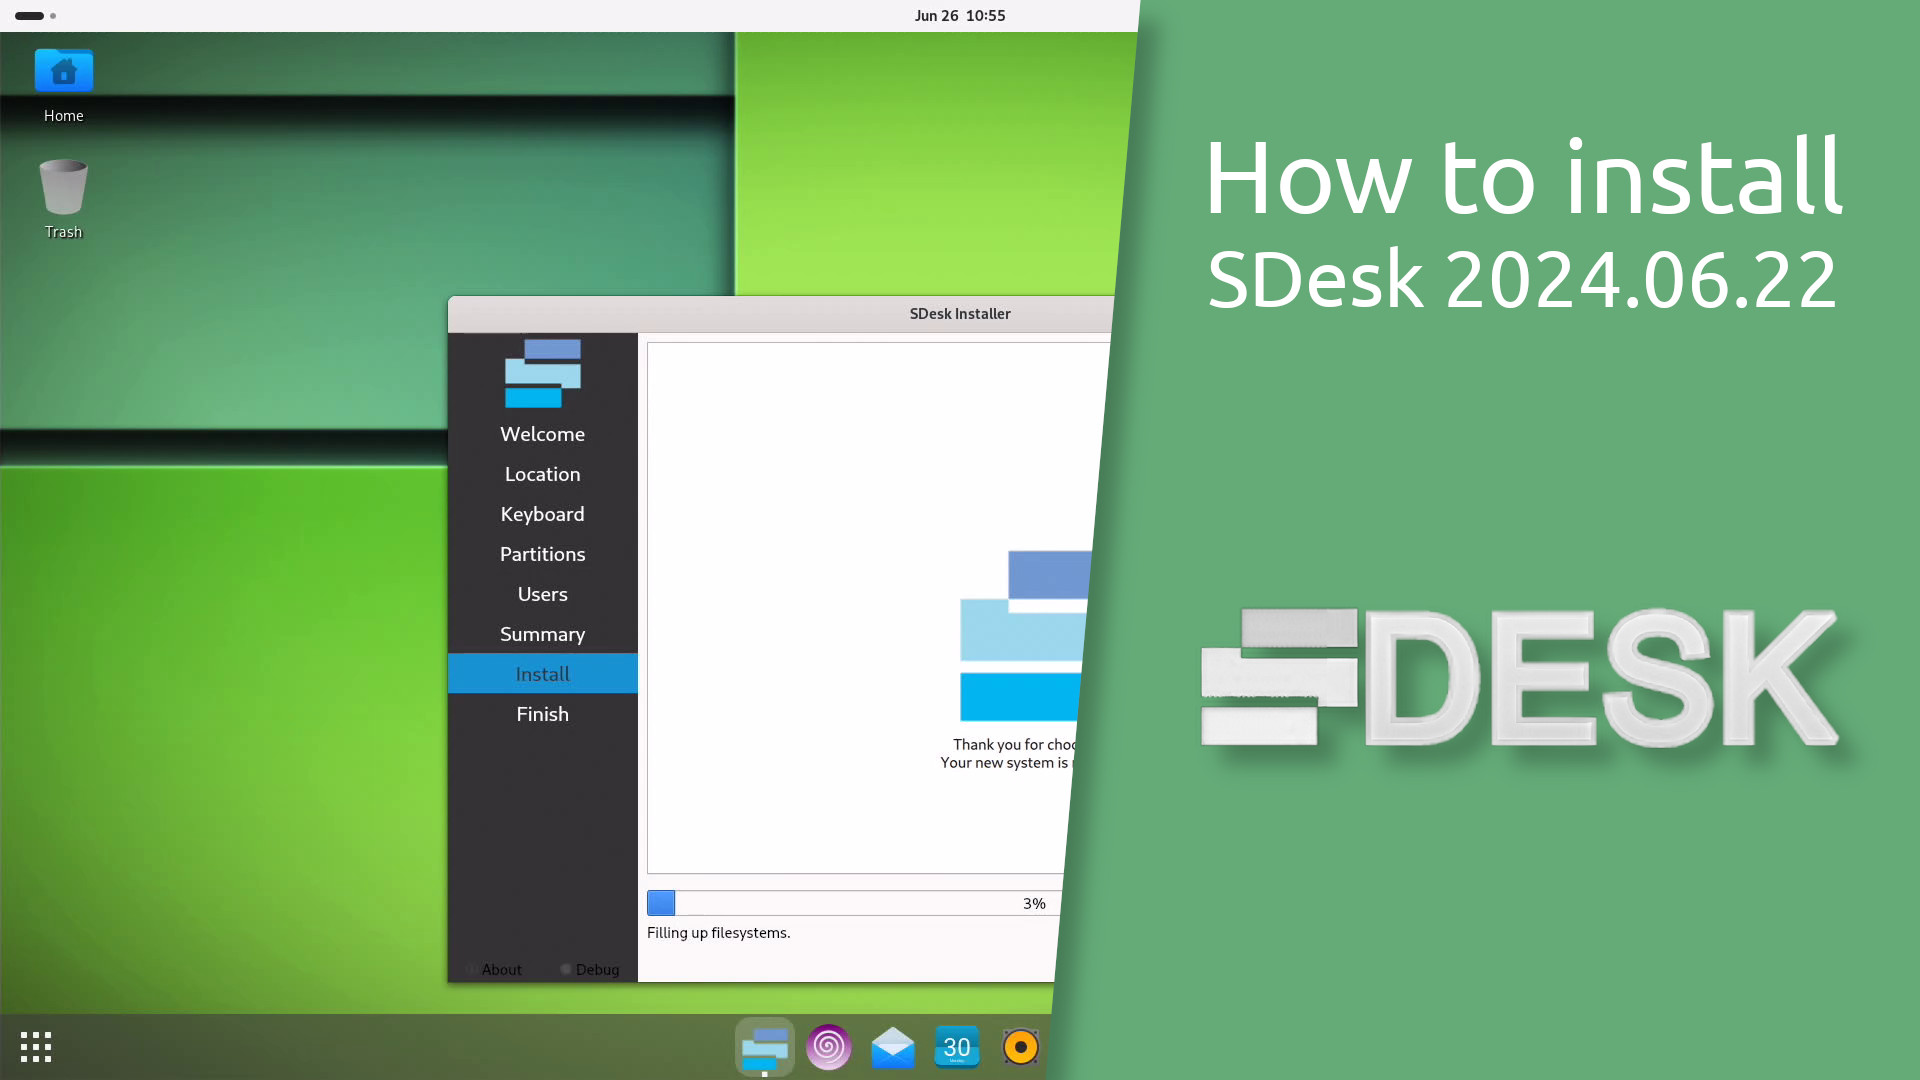 How to install SDesk 2024.06.22